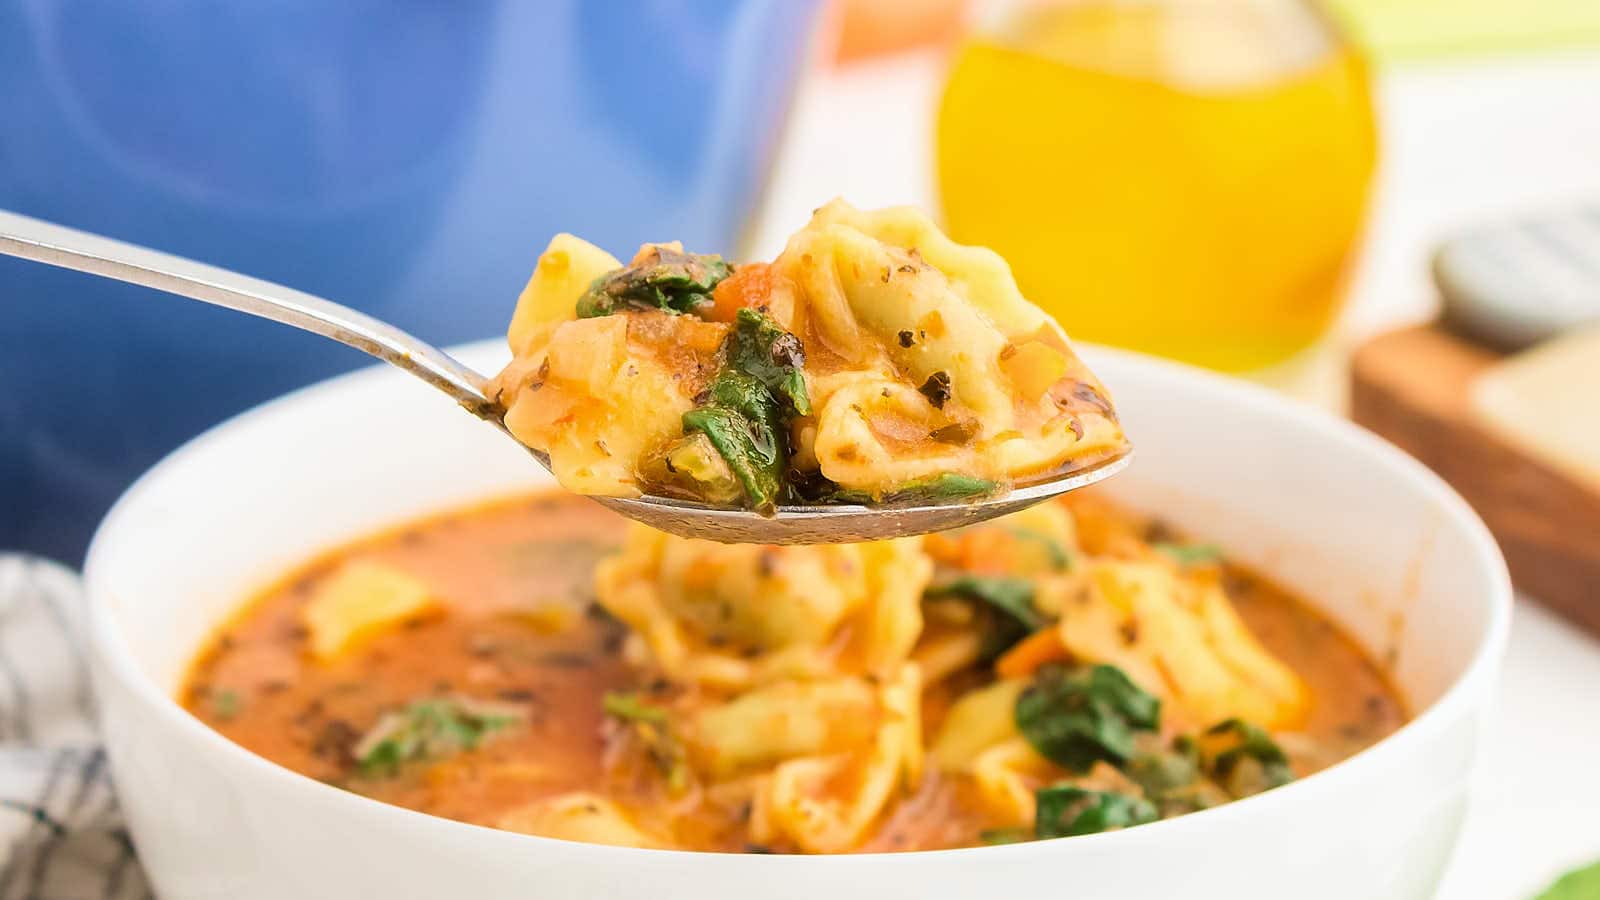 Tortellini Soup recipe by Cheerful Cook.